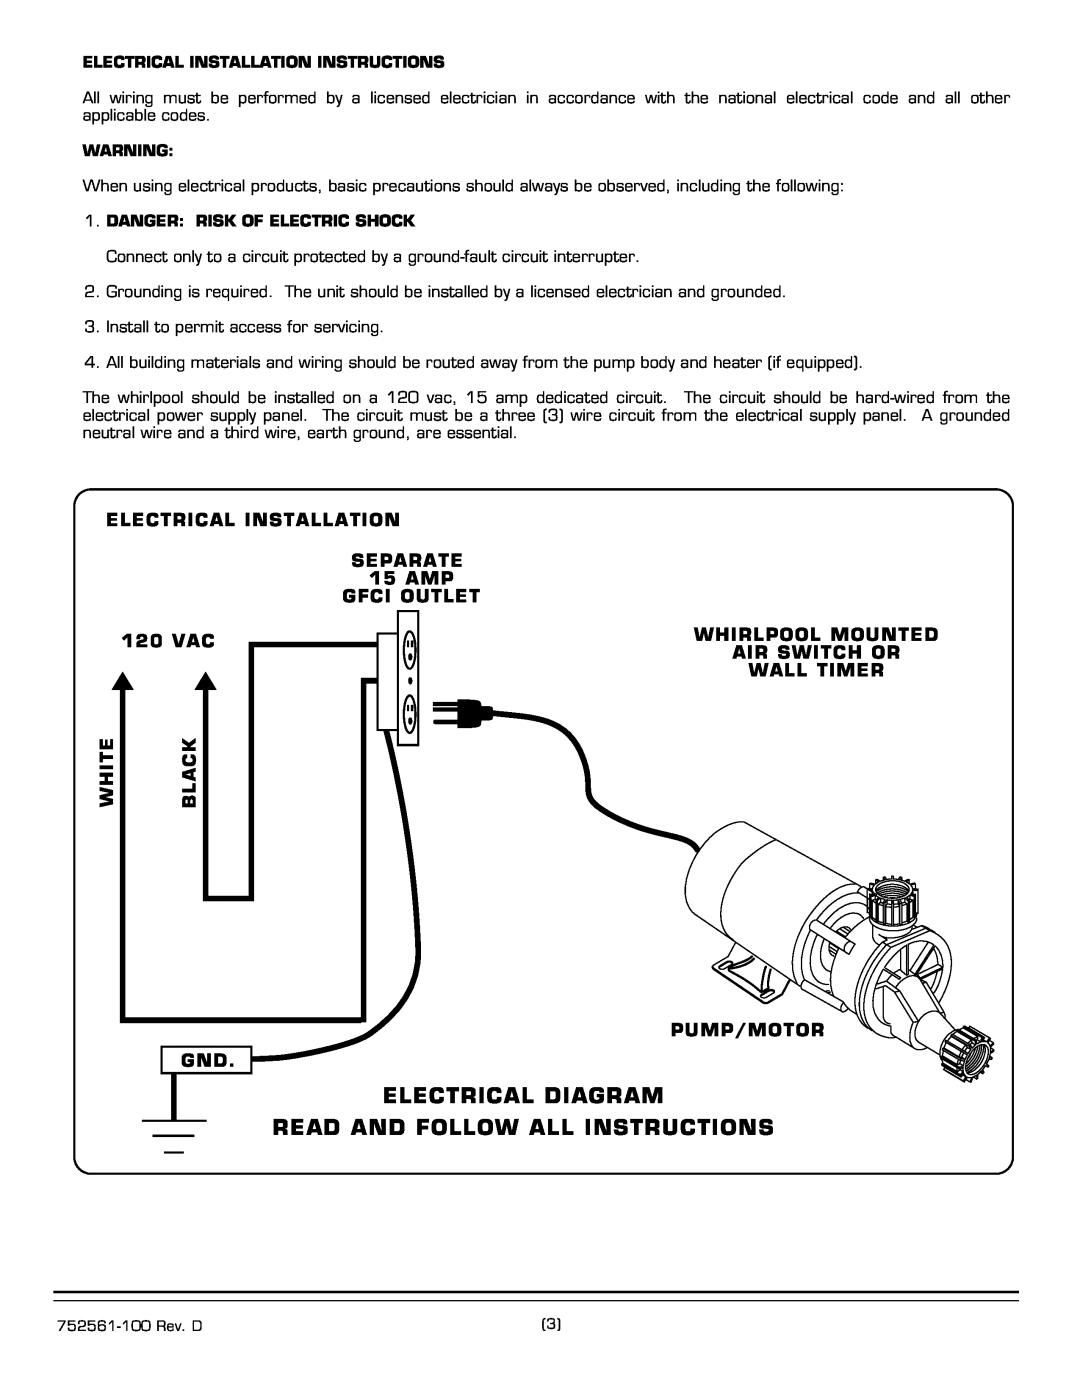 American Standard 2776.XXXW Series Electrical Diagram, Read And Follow All Instructions, Gfci Outlet, 120 VAC, Wall Timer 